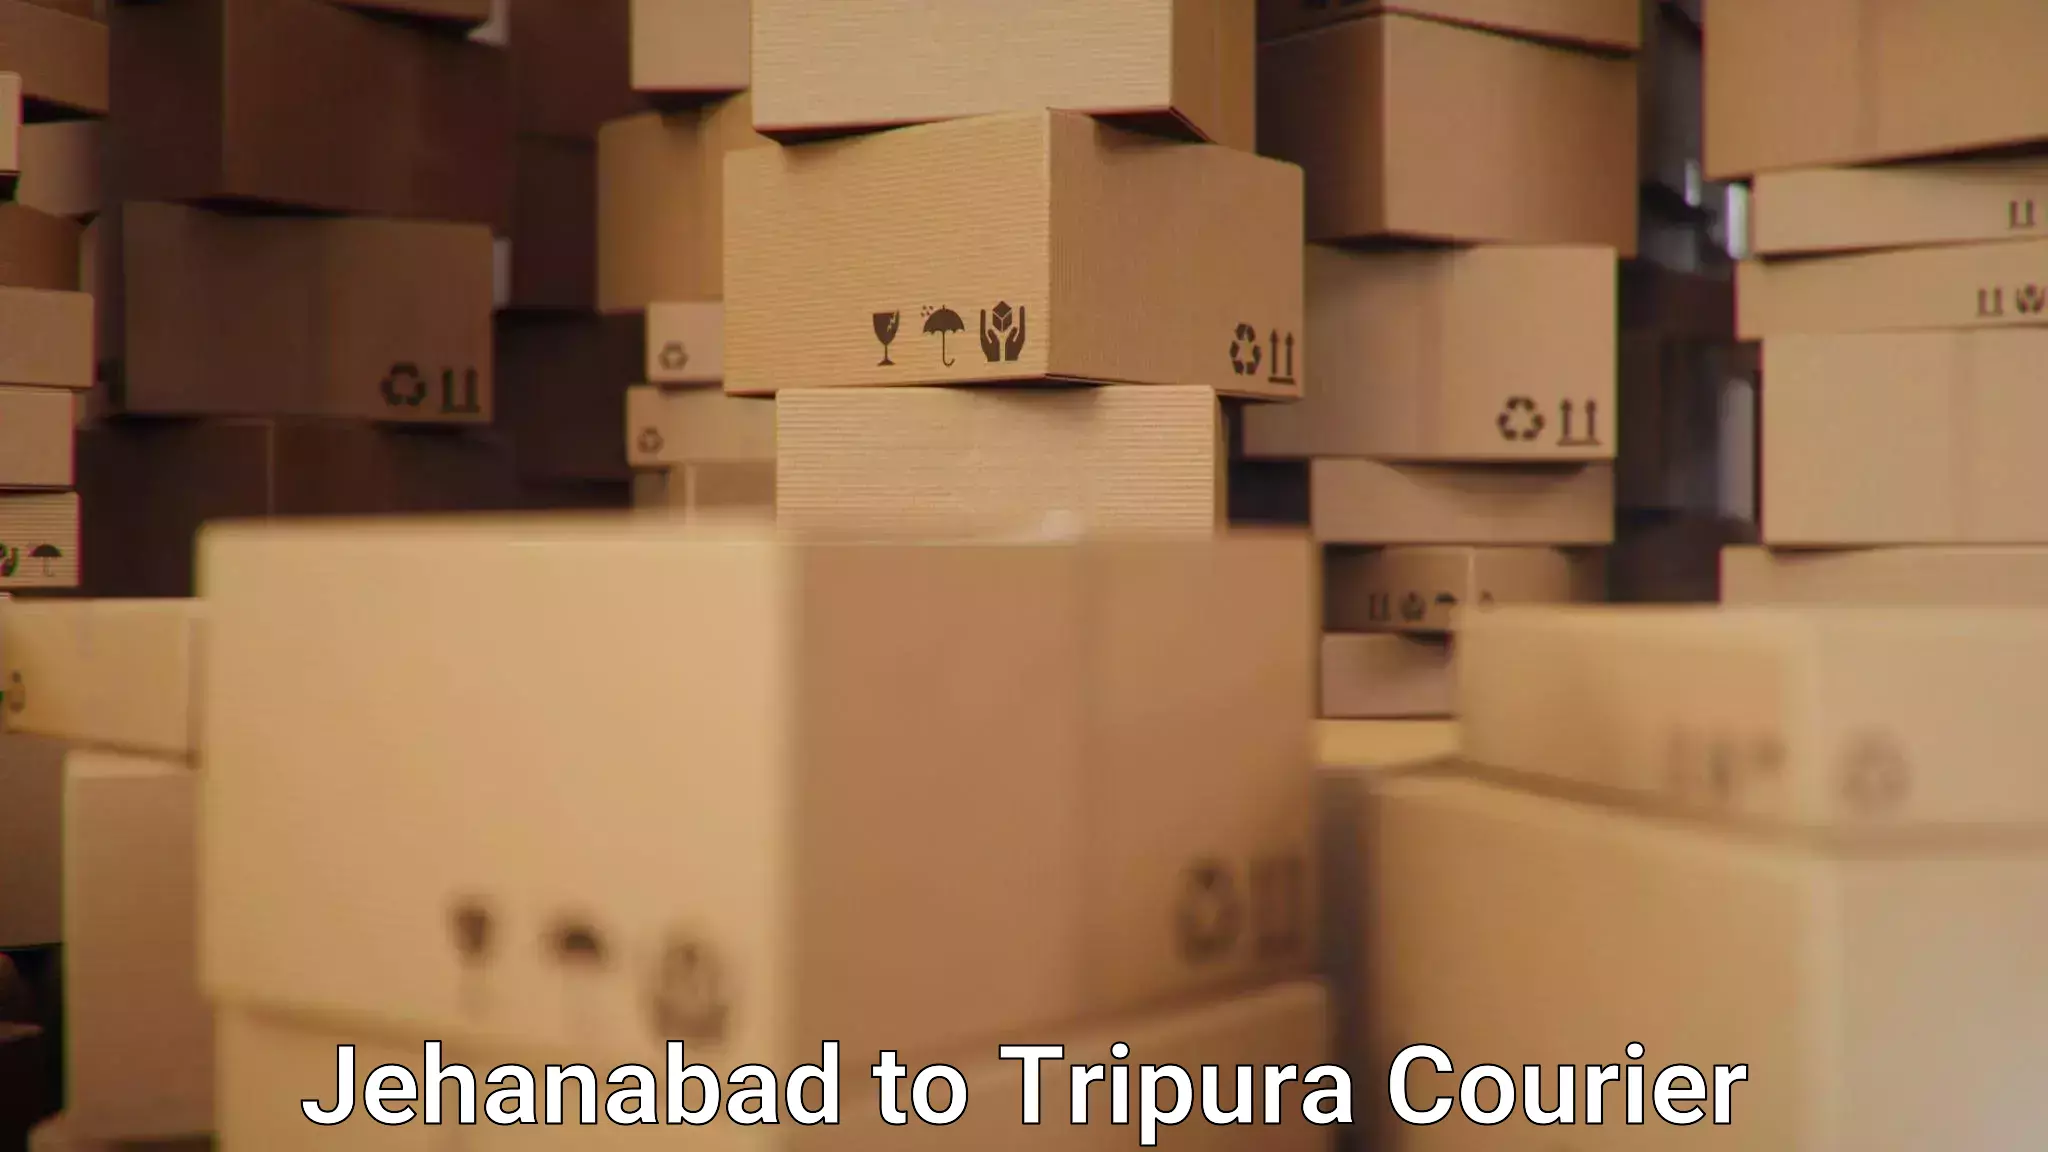 Parcel handling and care Jehanabad to Udaipur Tripura